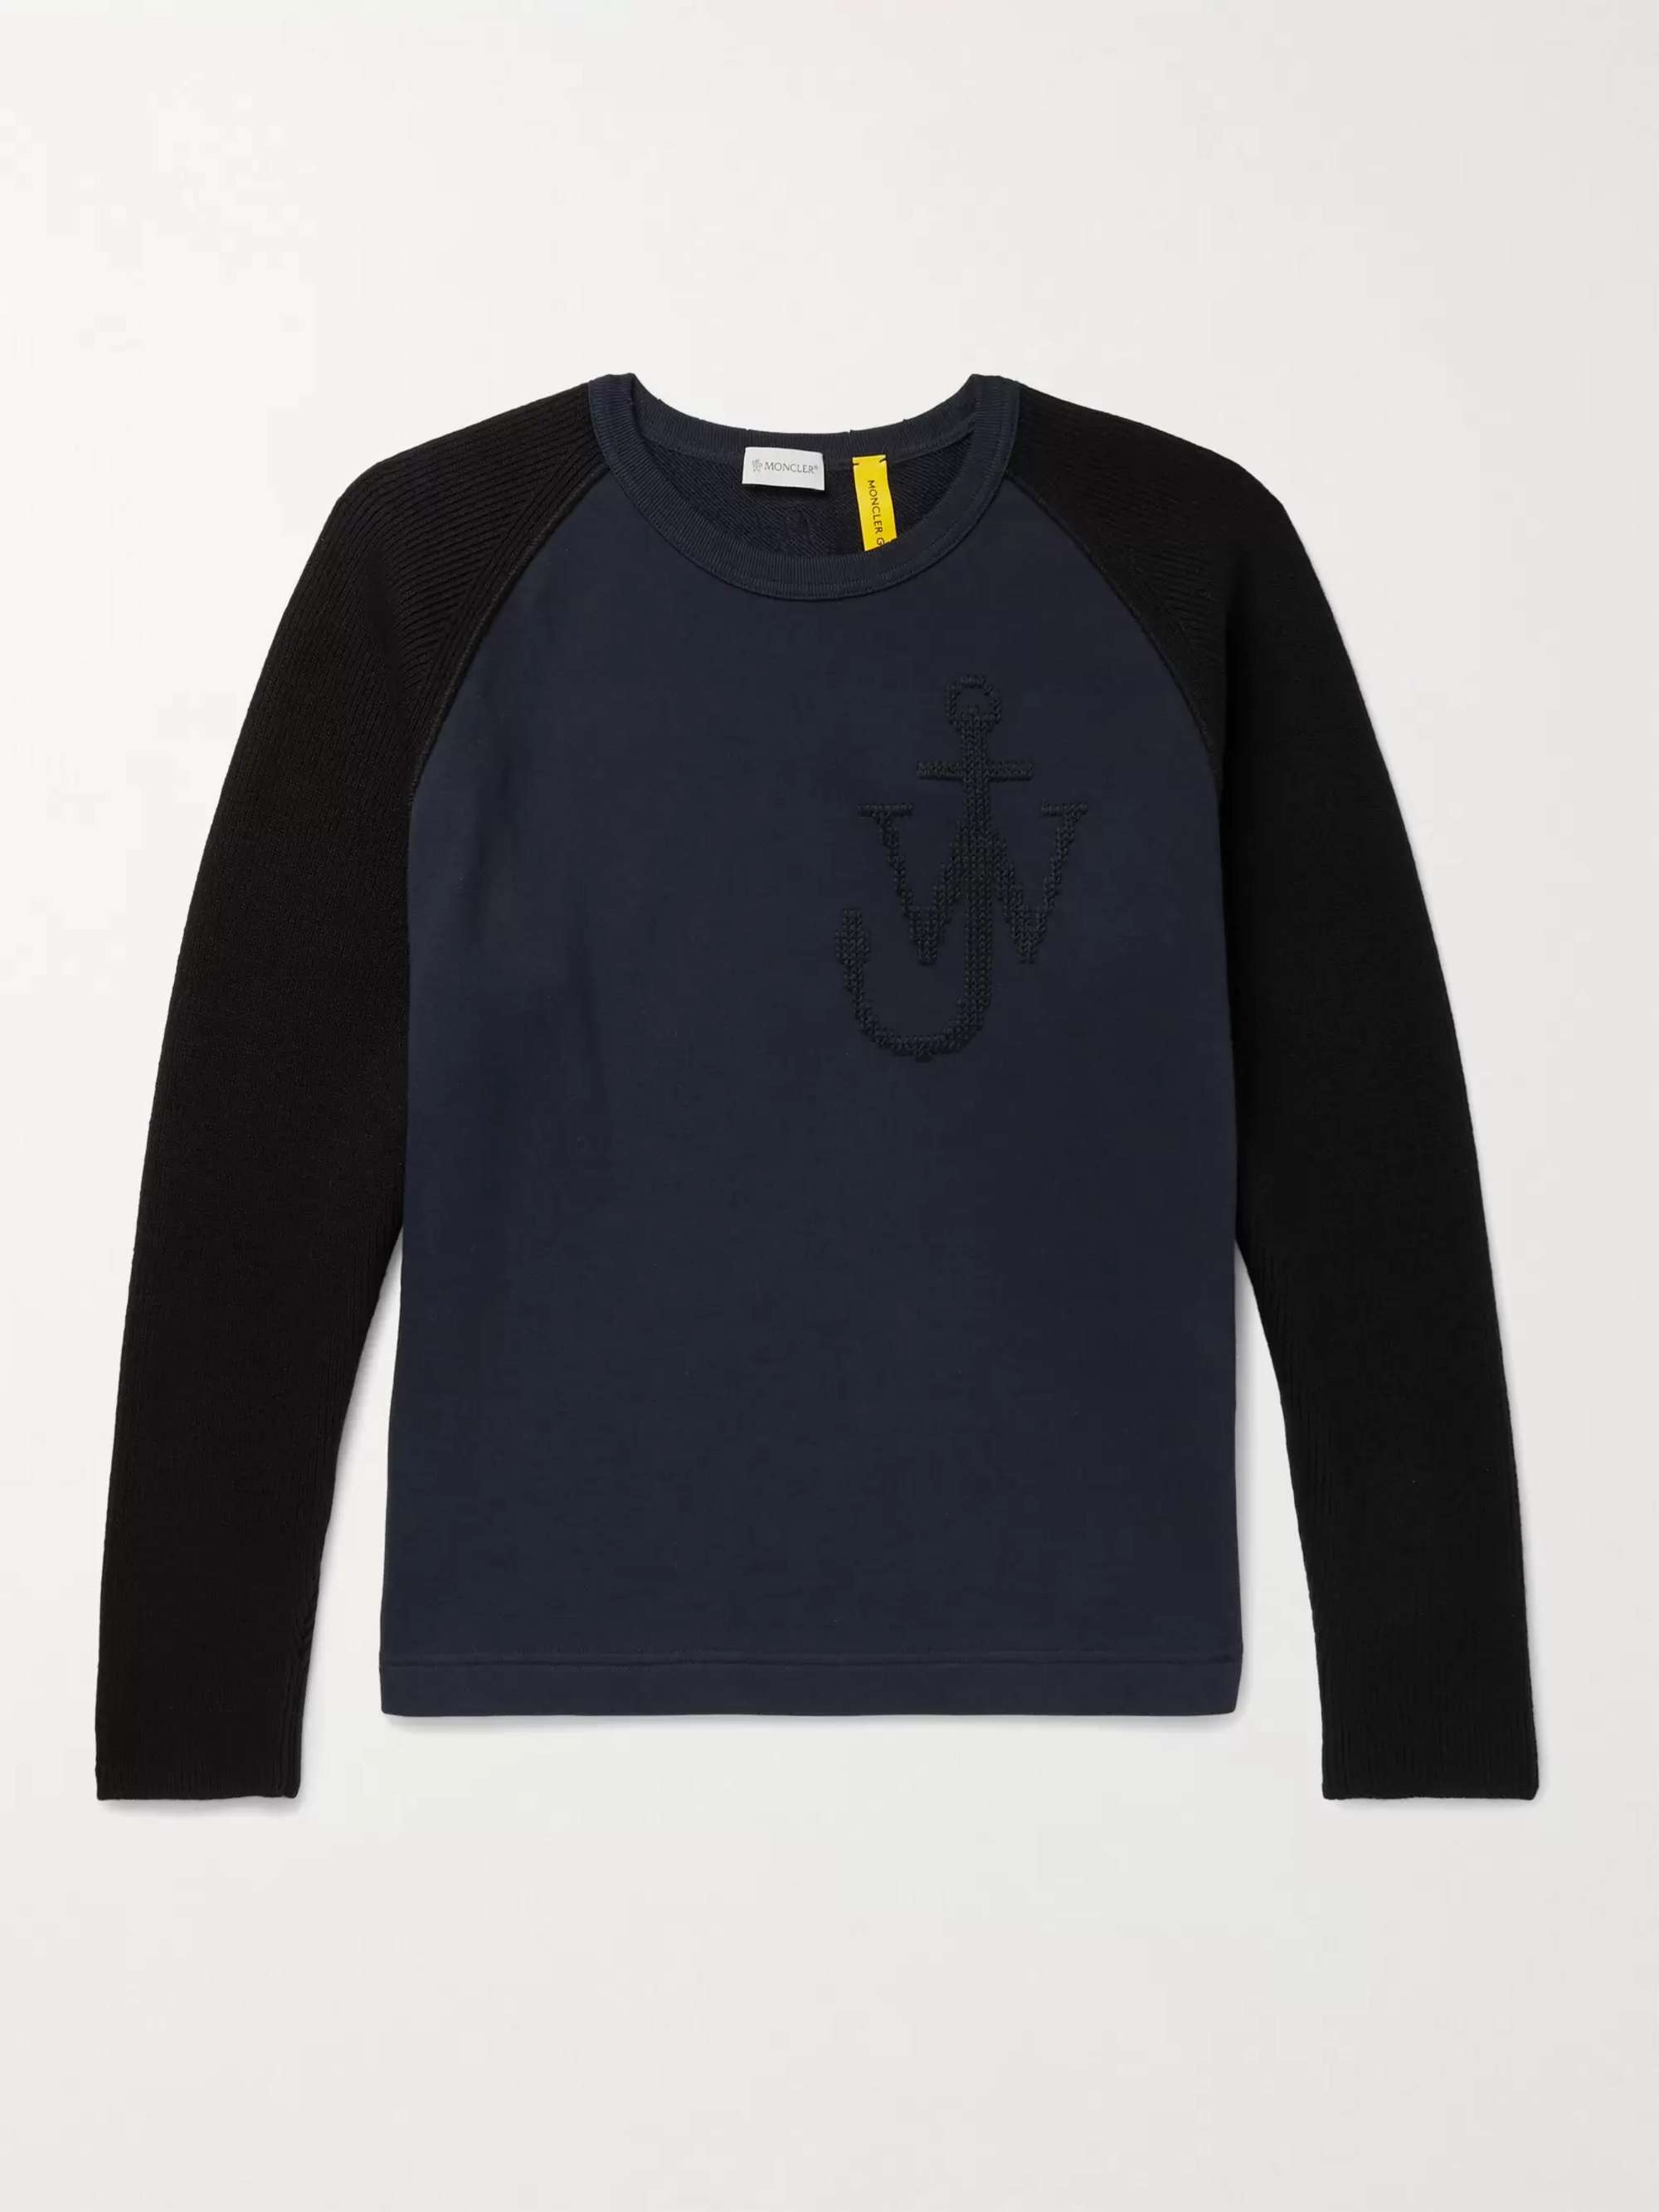 MONCLER GENIUS 1 Moncler JW Anderson Logo-Embroidered Virgin Wool and  Loopback Cotton-Jersey Sweatshirt | MR PORTER